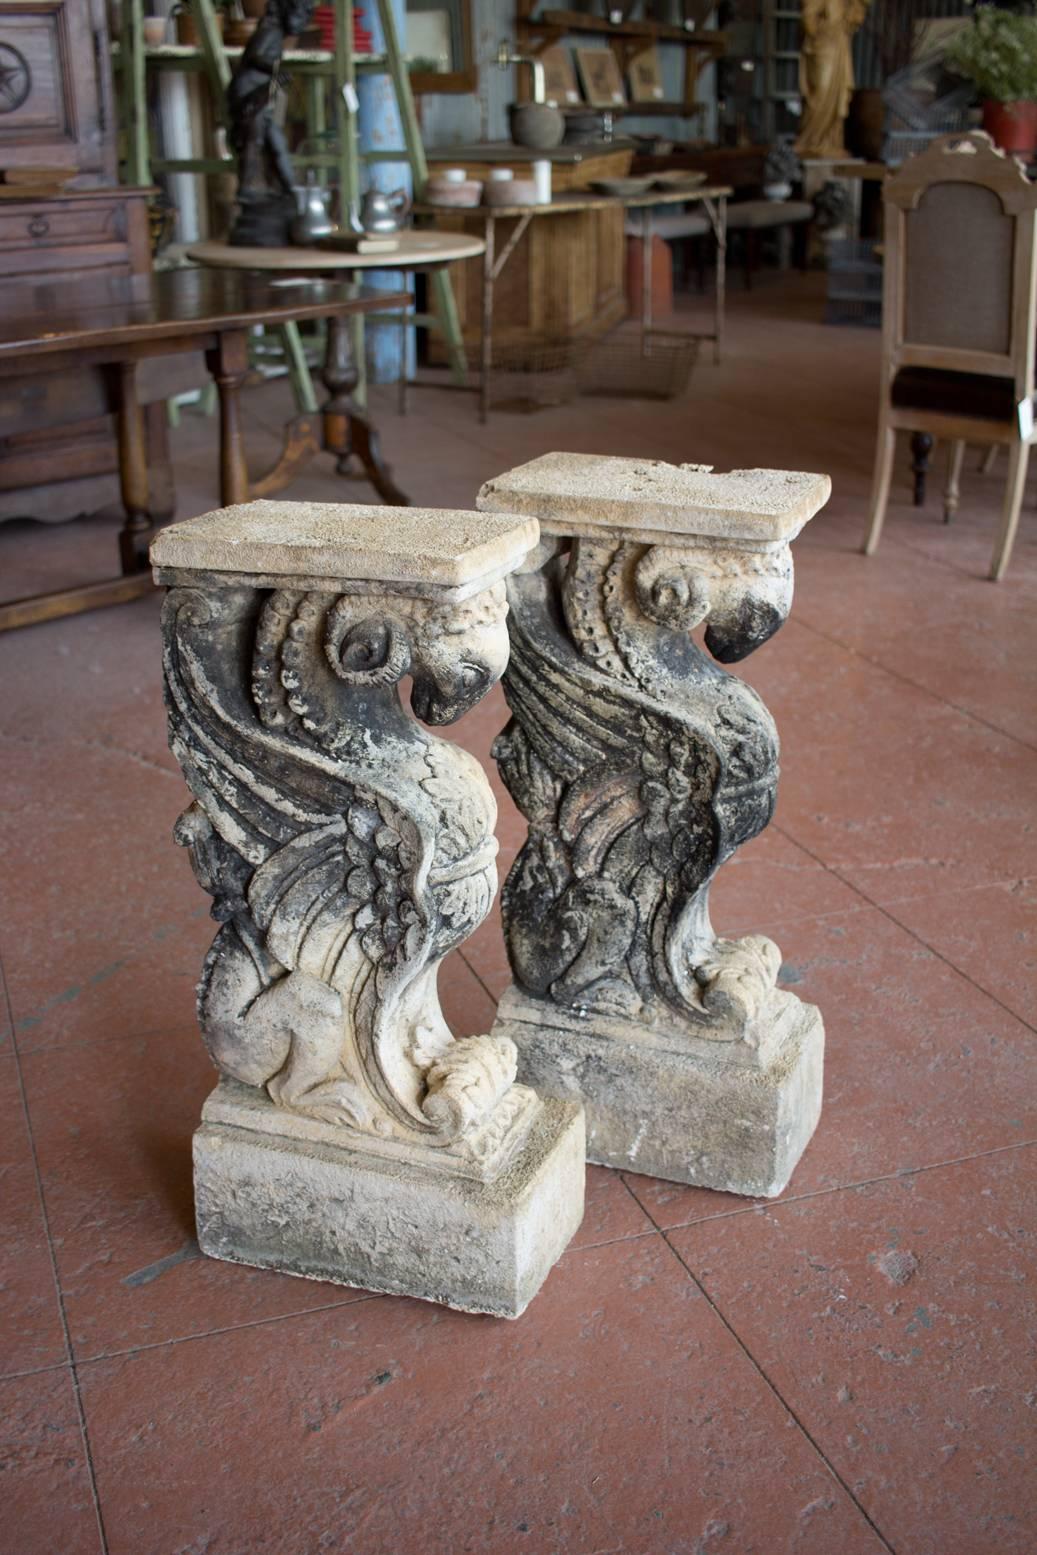 Antique pair of medieval style stone Griffin supports.

Would make a lovely backside couch table if you got a nice piece of tempered glass cut.